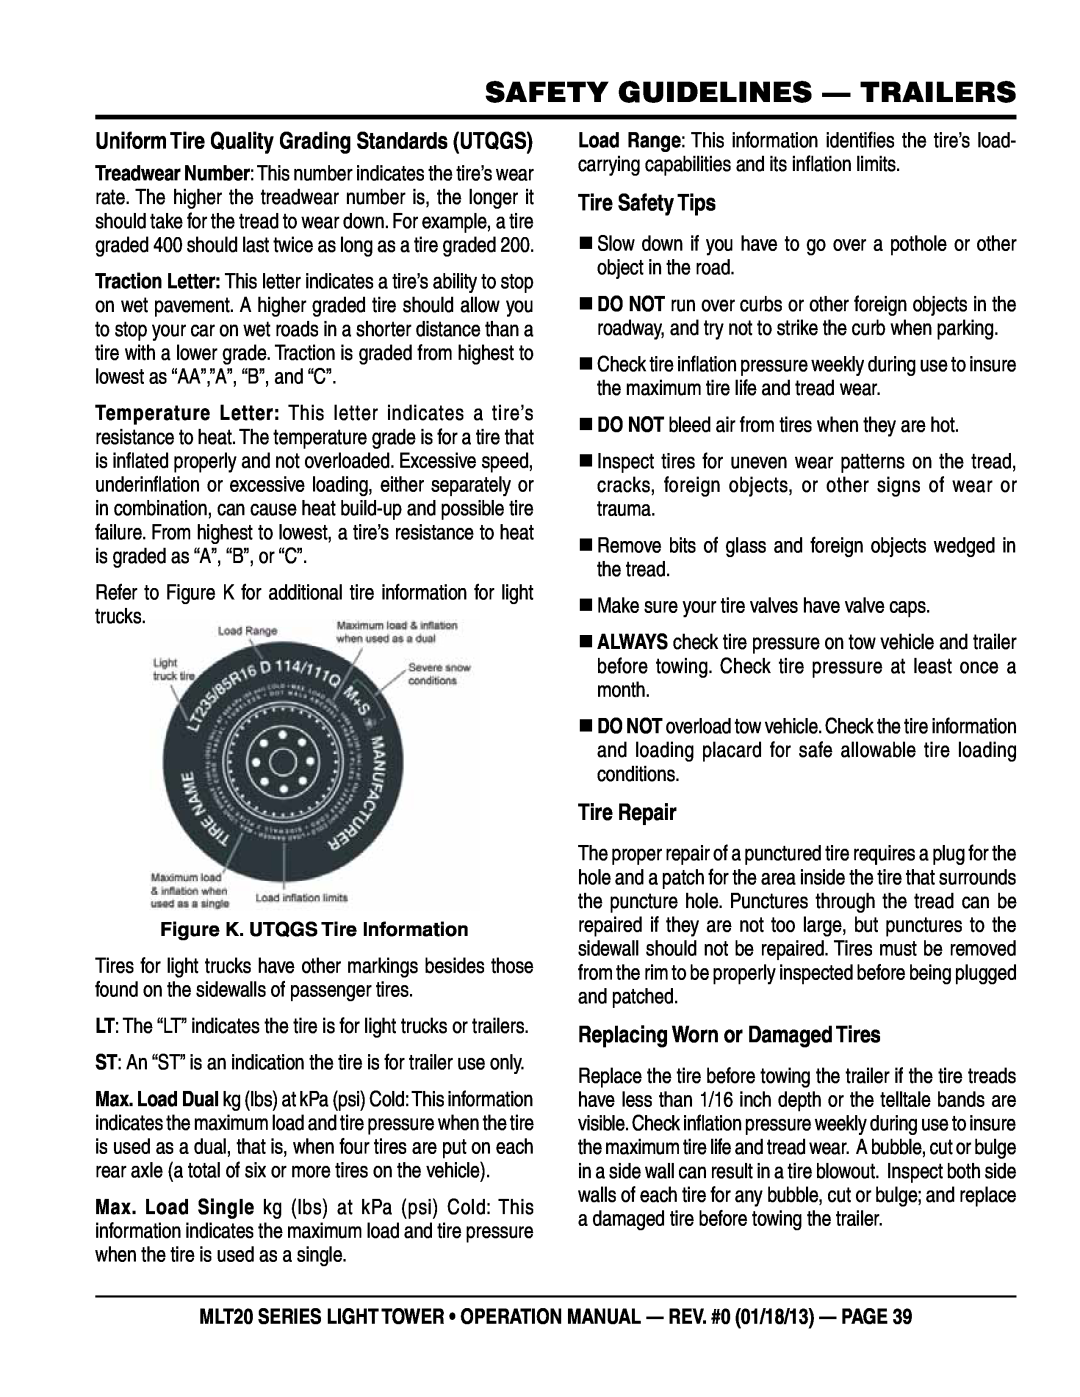 Multi Tech Equipment MLT20DCA6 operation manual Tire safety Tips, Tire Repair, Replacing Worn or Damaged Tires 